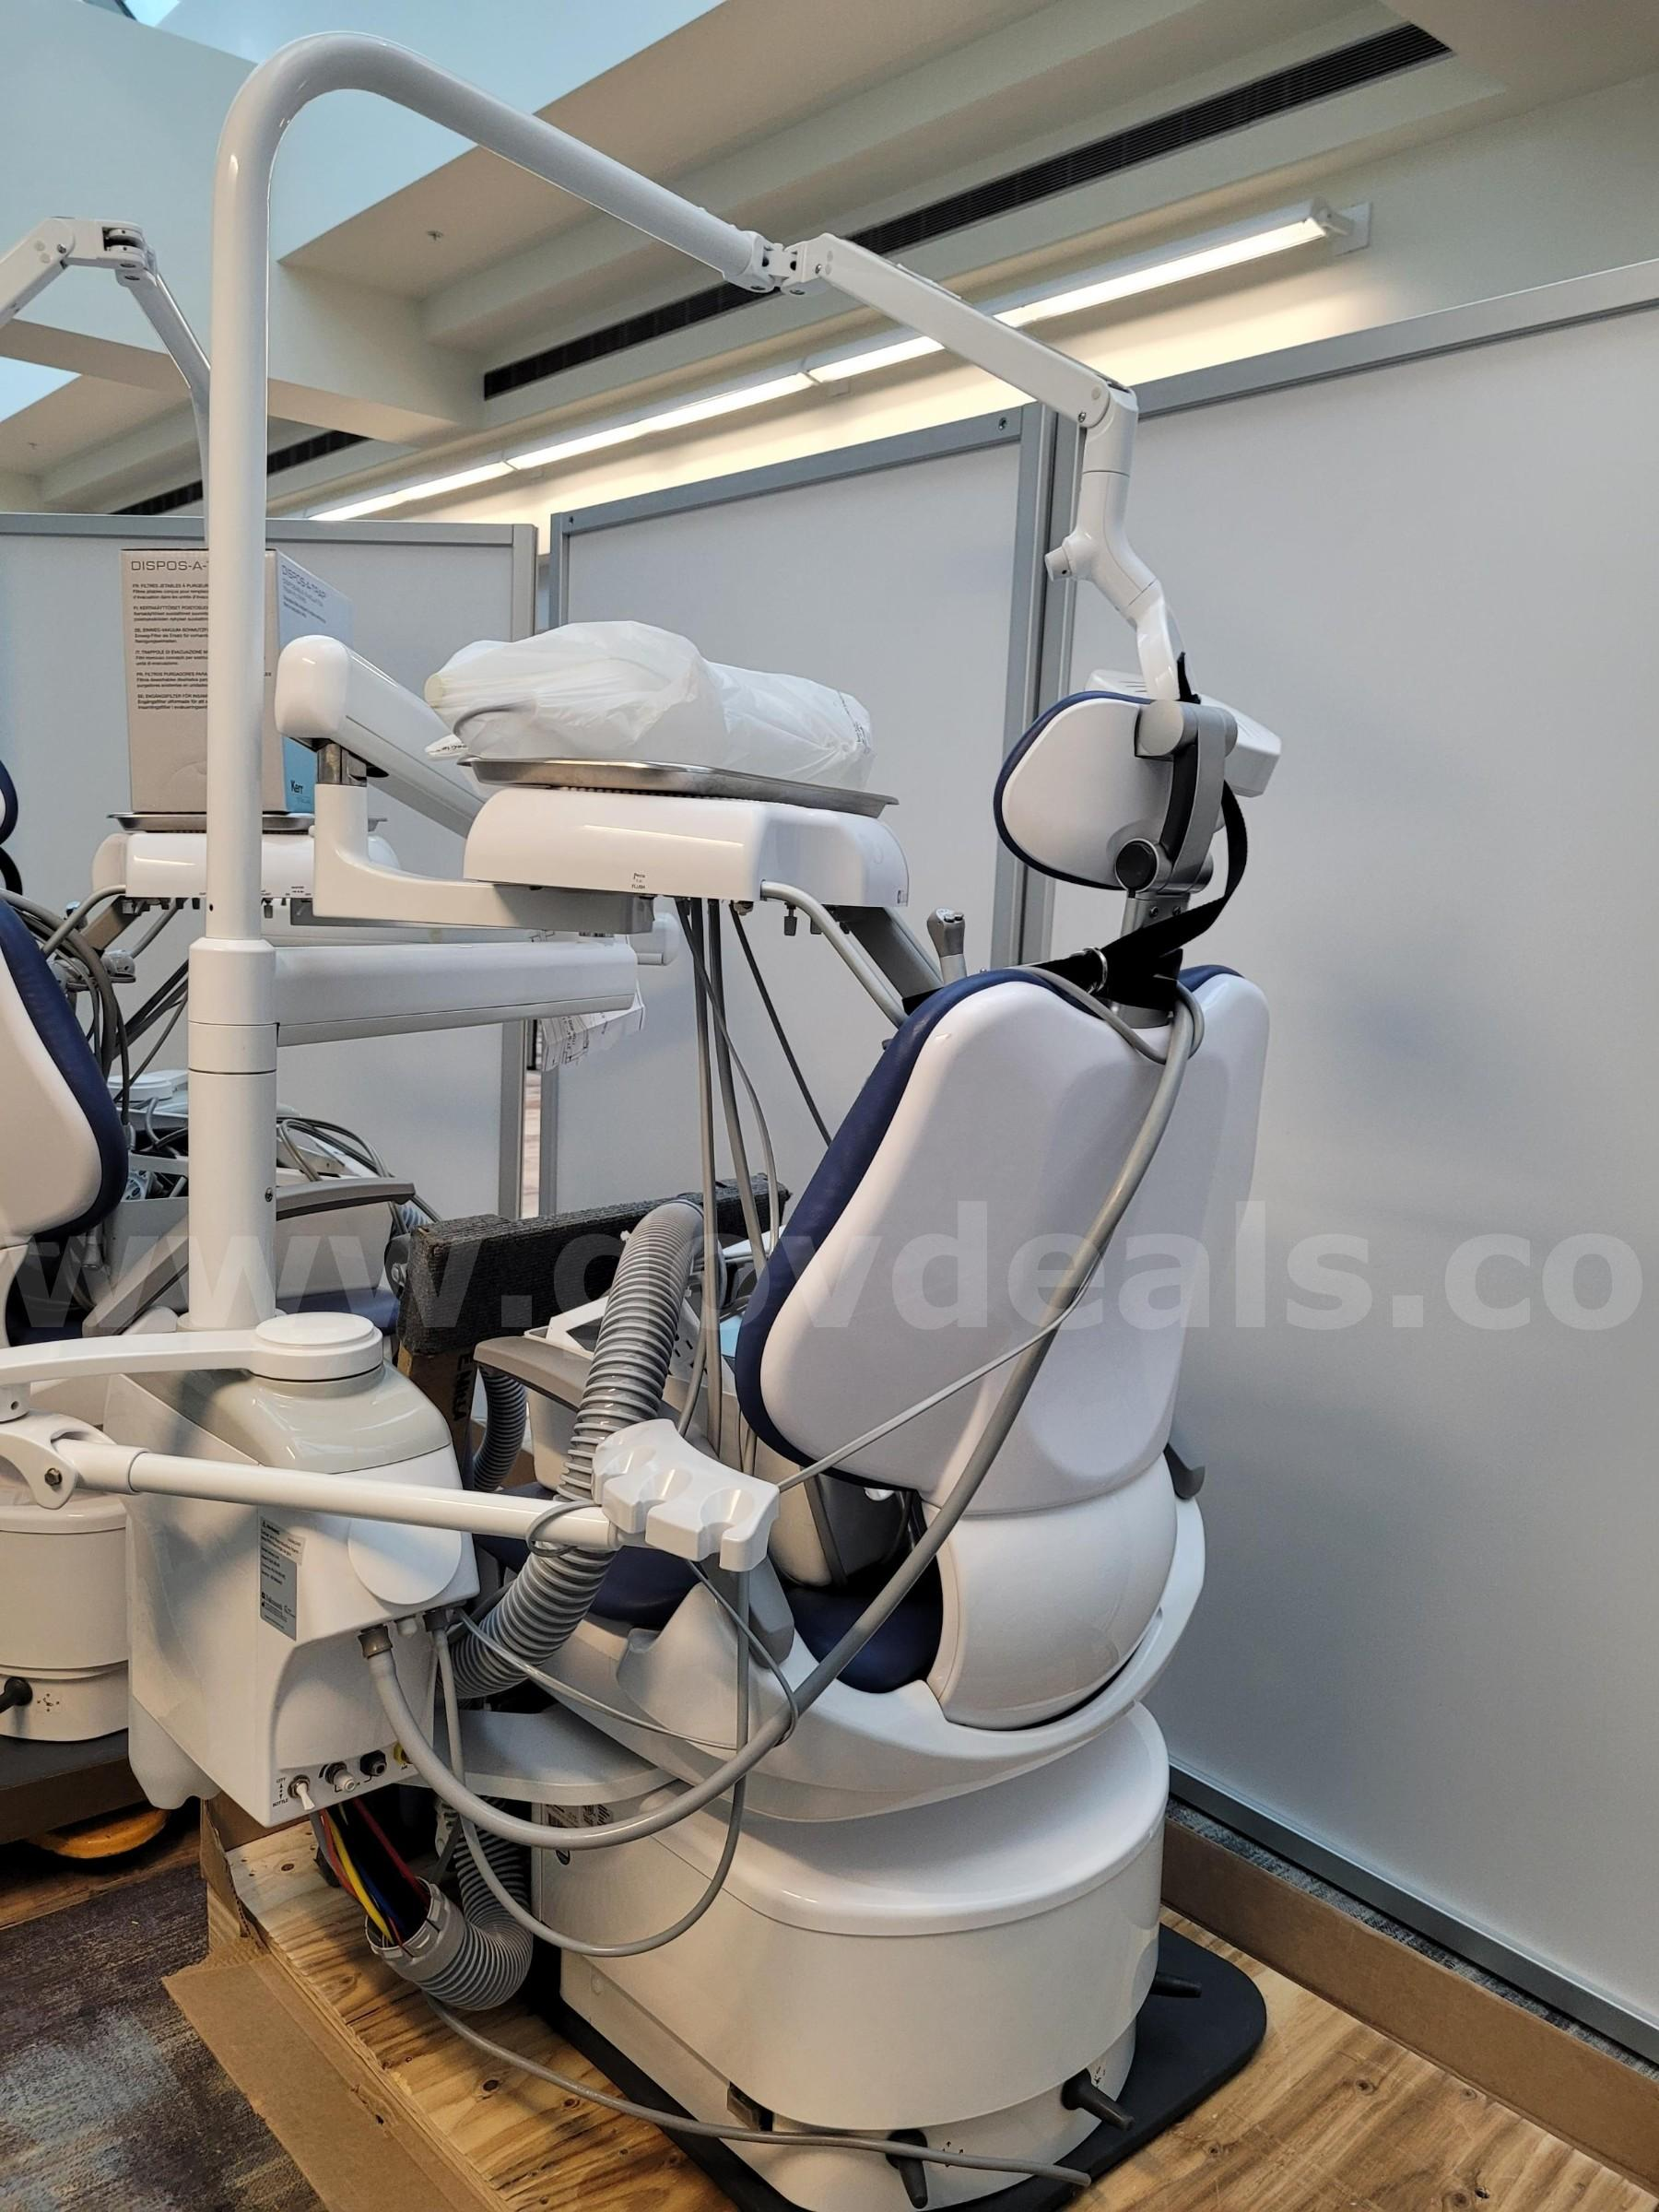 2019 Belmont Knee Break Dental Chair with Front Delivery